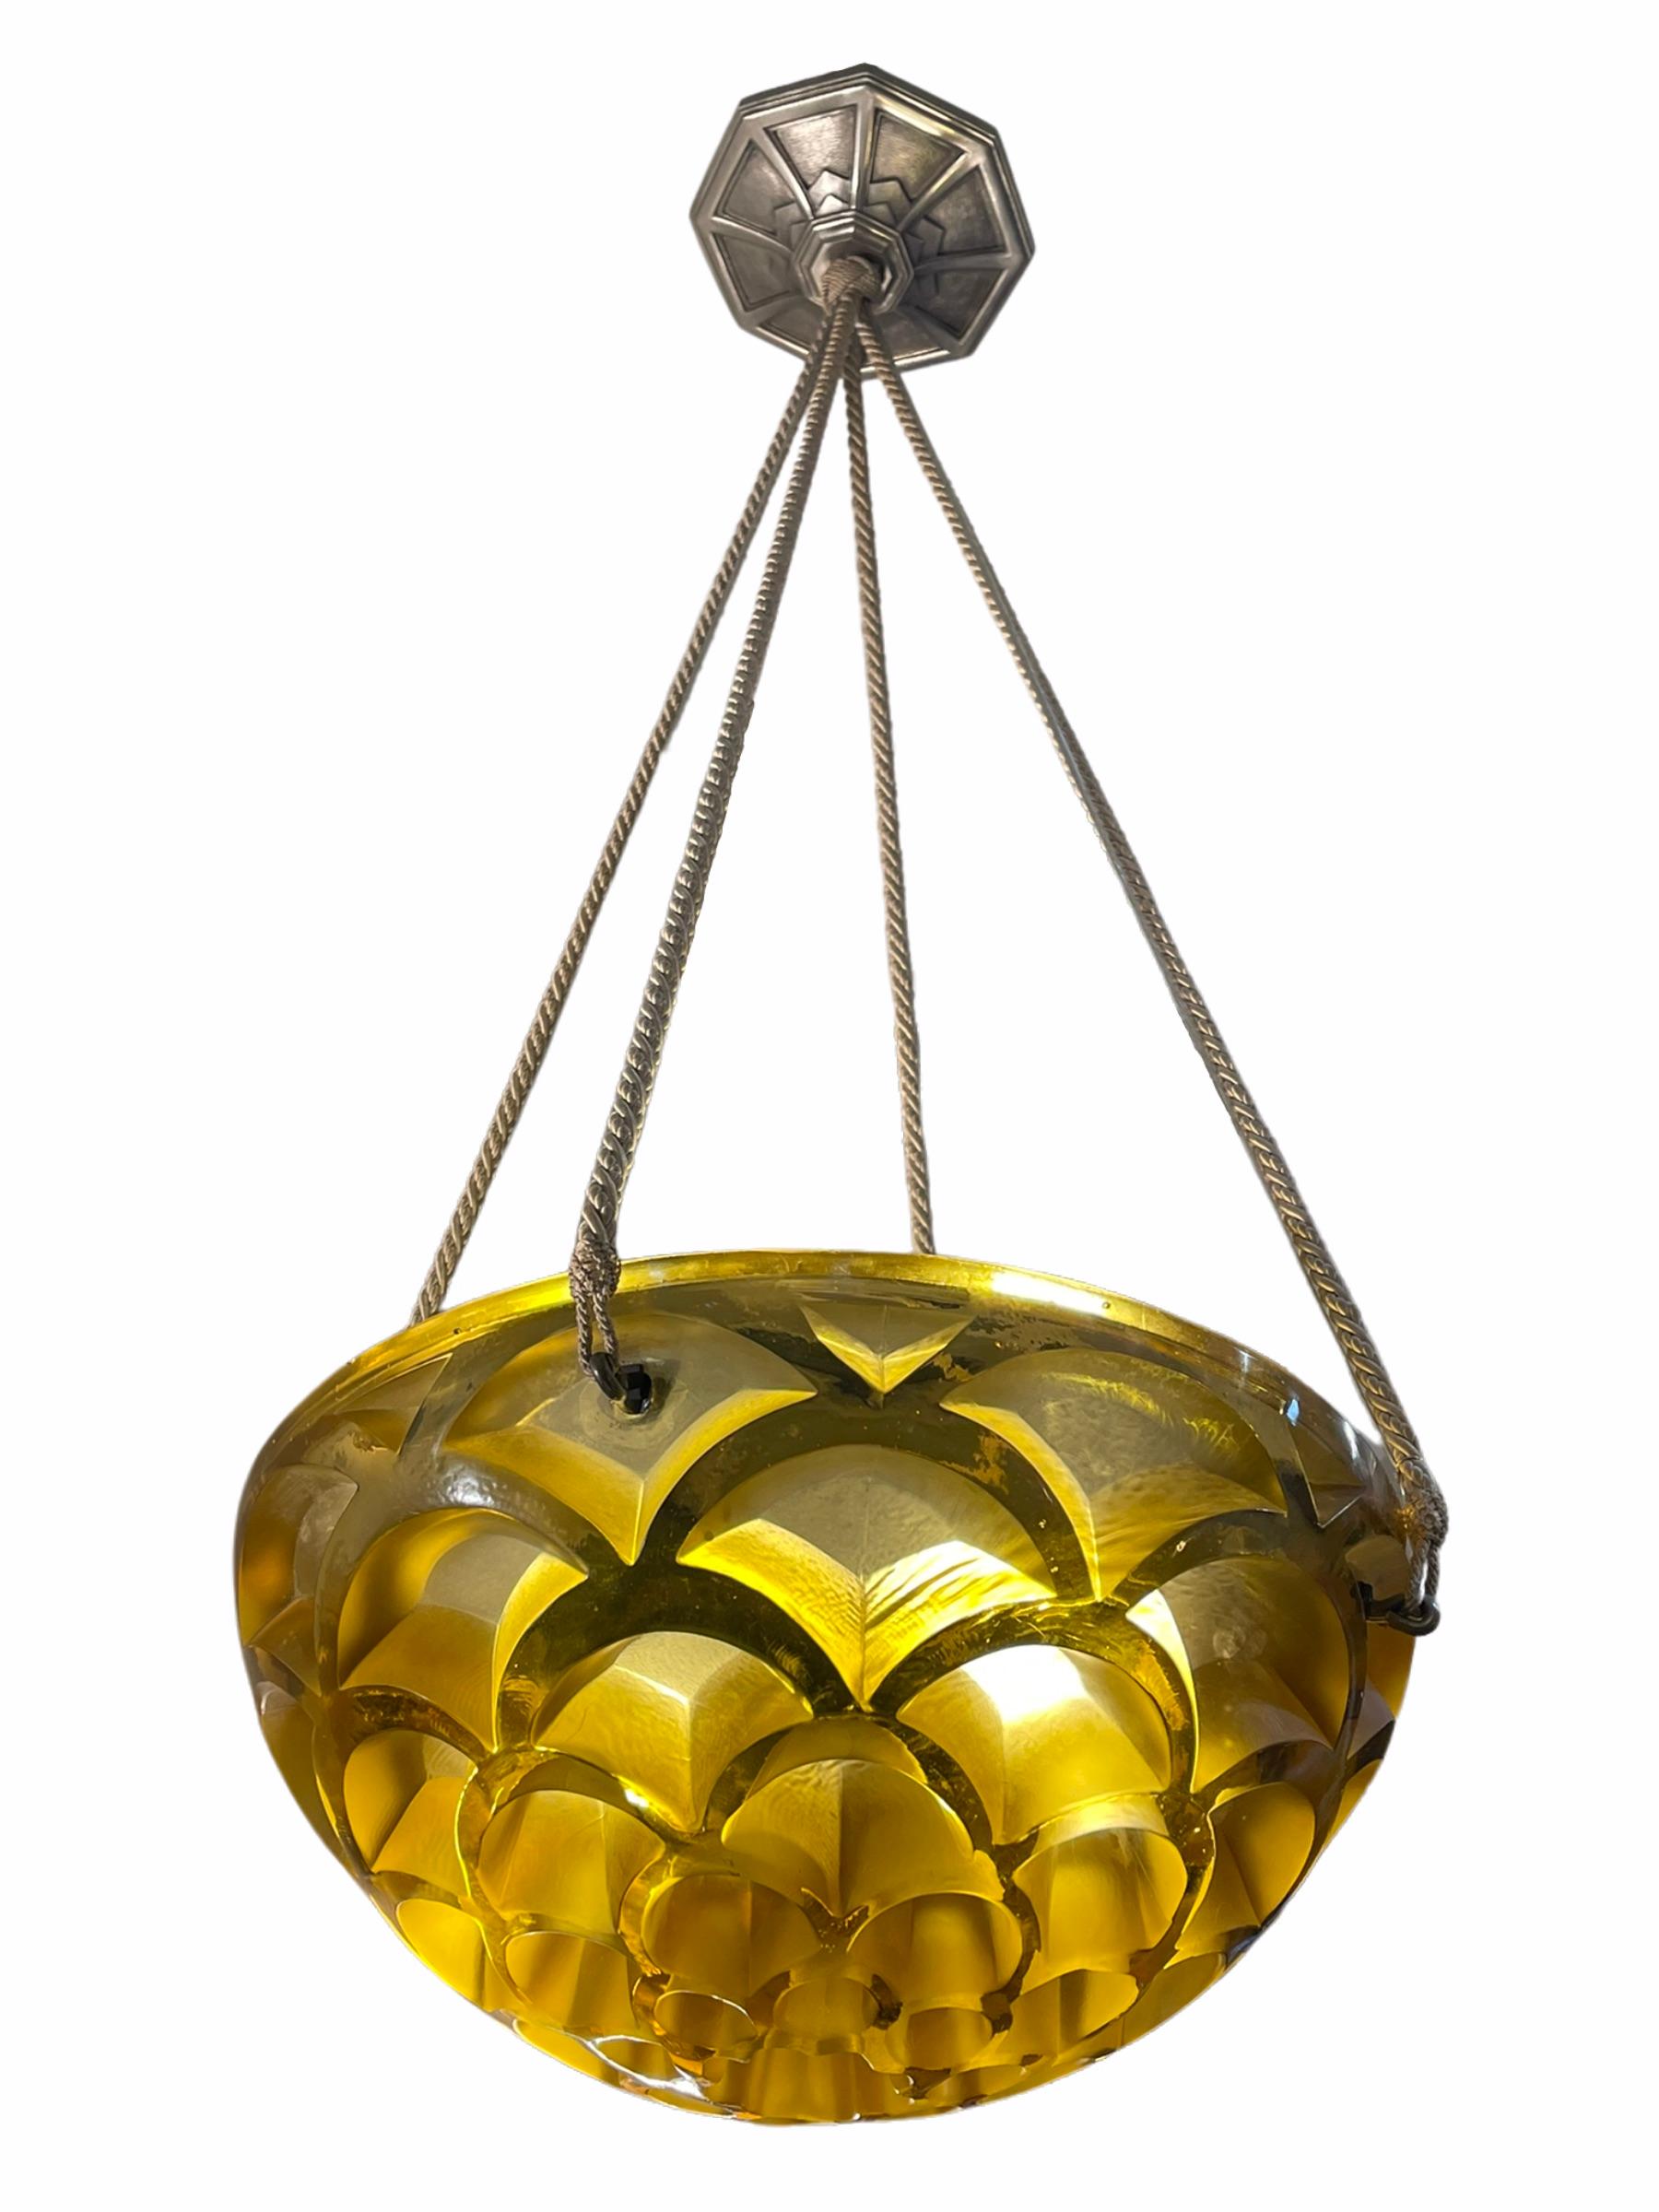 Art Deco 1926 Rene Lalique Rinceaux Complet Ceiling Light Chandelier Yellow Amber Glass